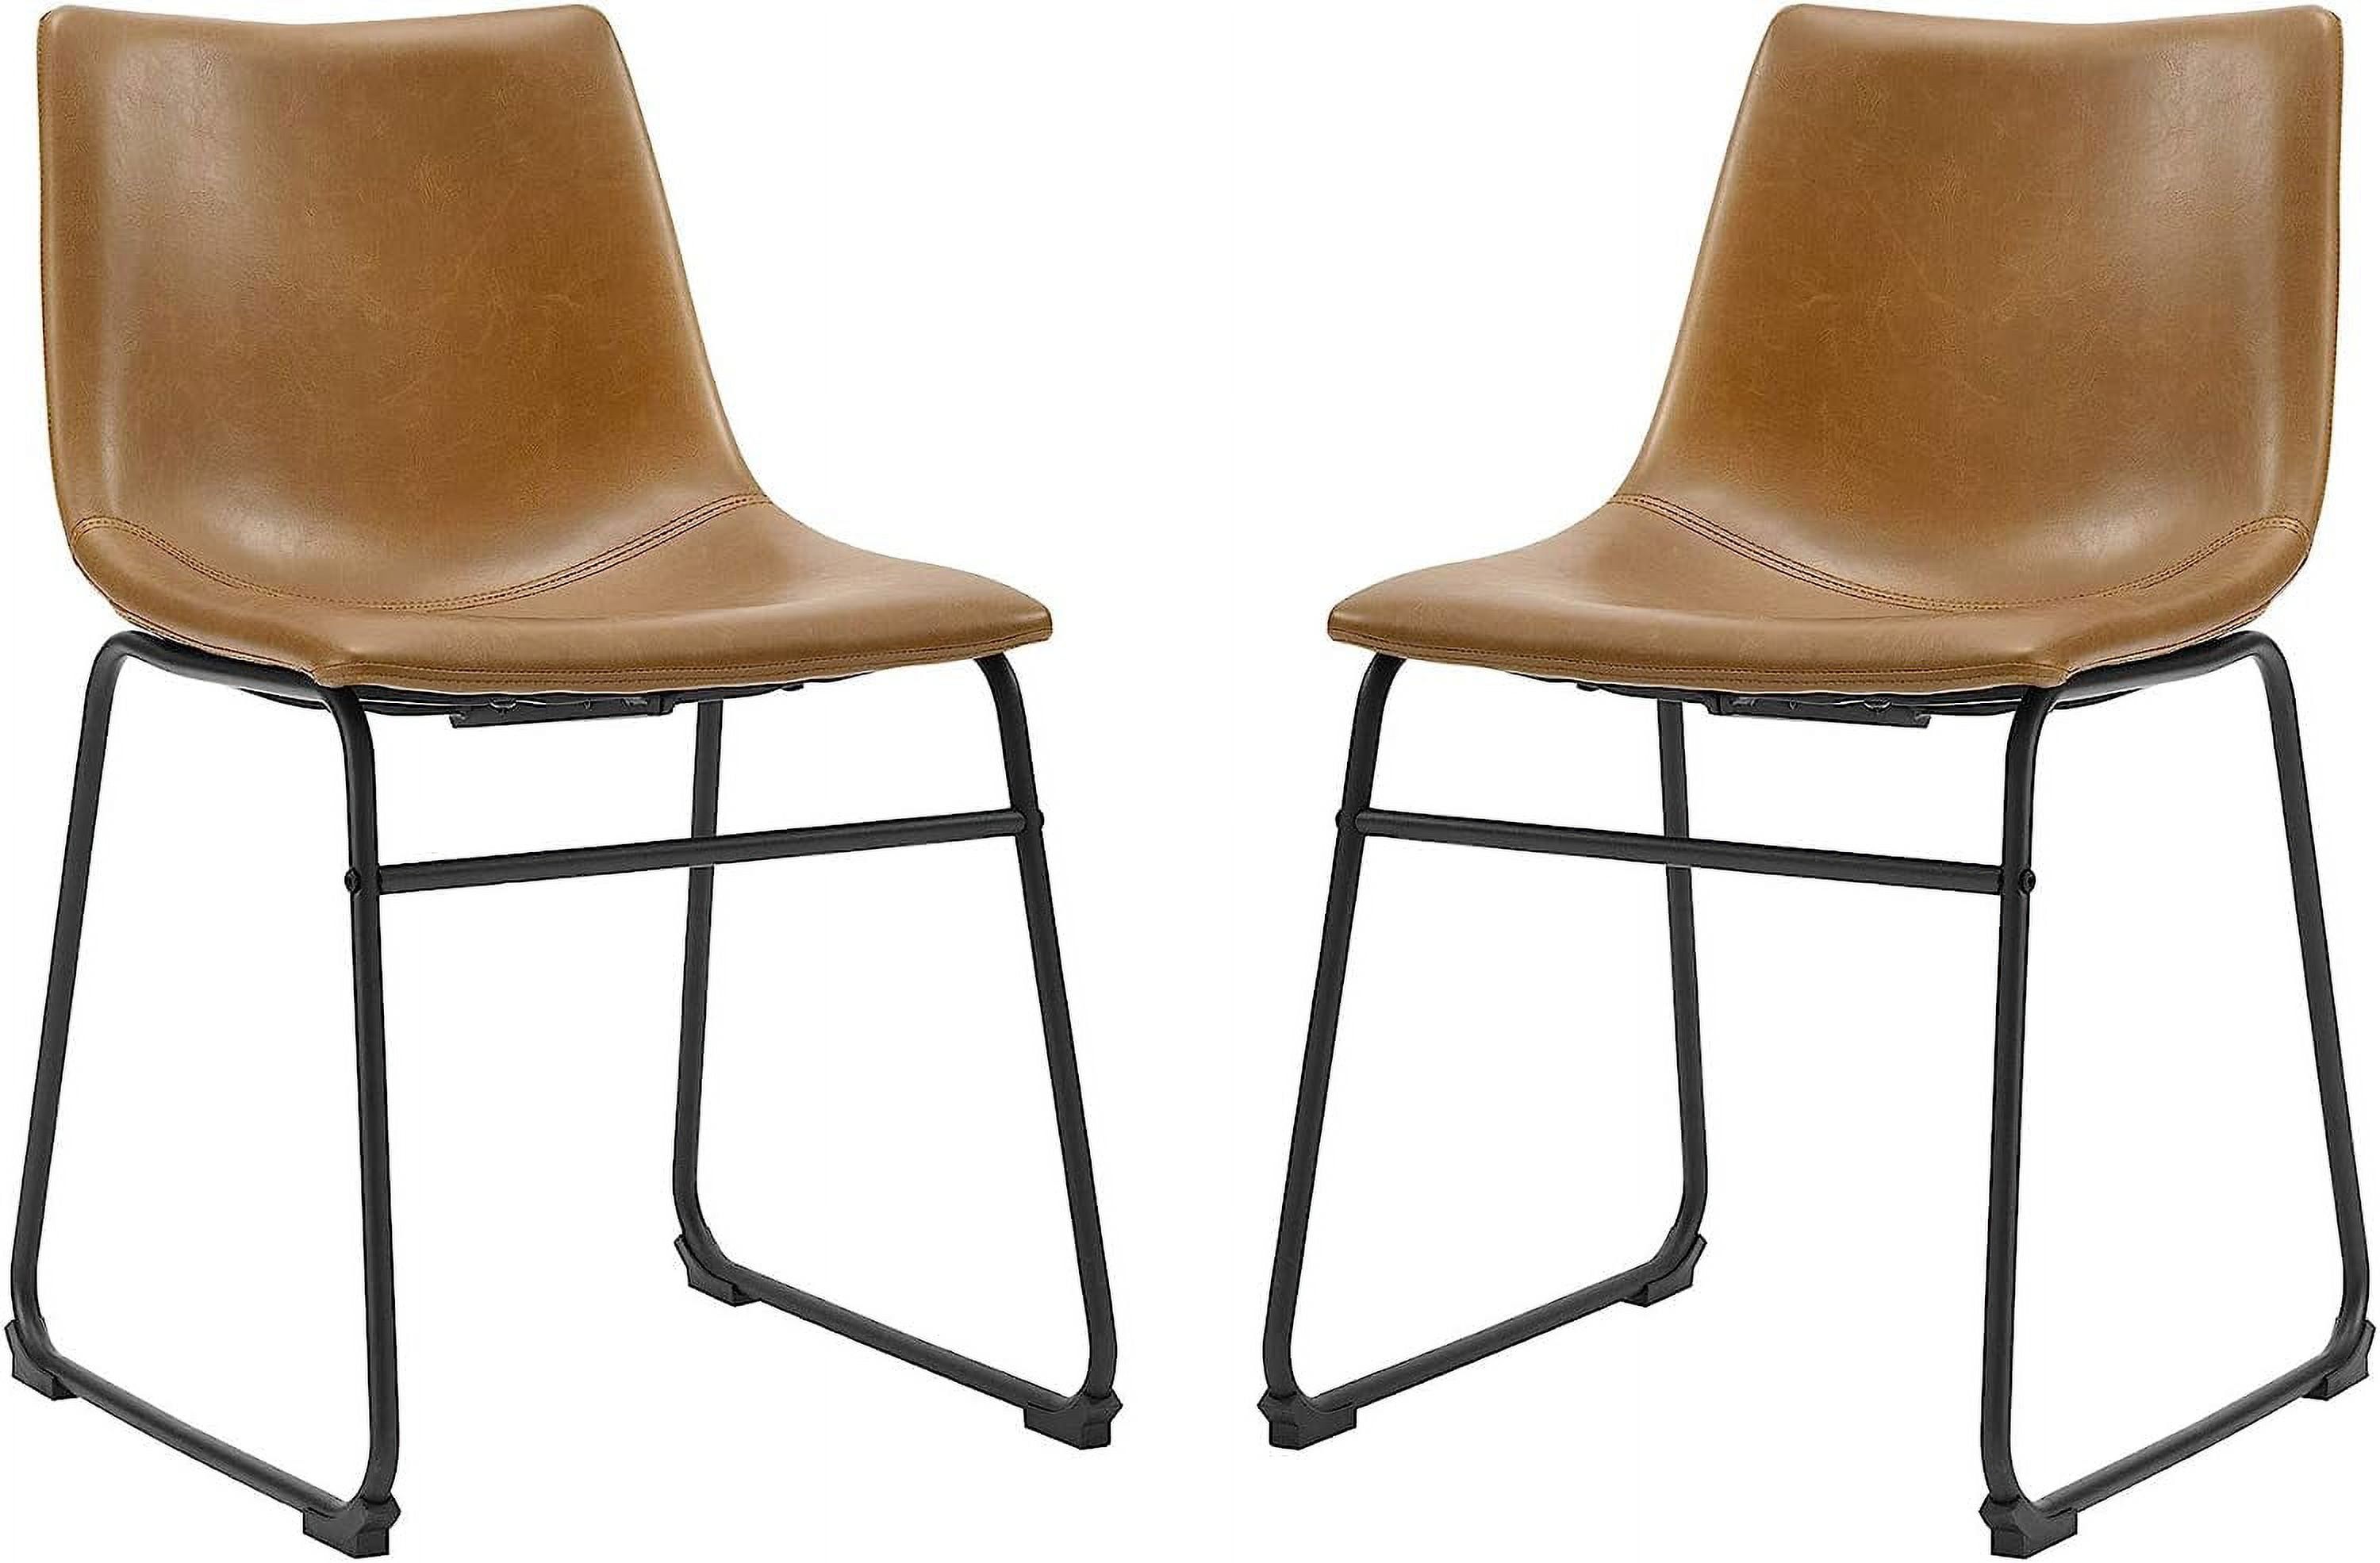 Whiskey Brown Faux Leather & Brushed Metal Dining Chair, Set of 2